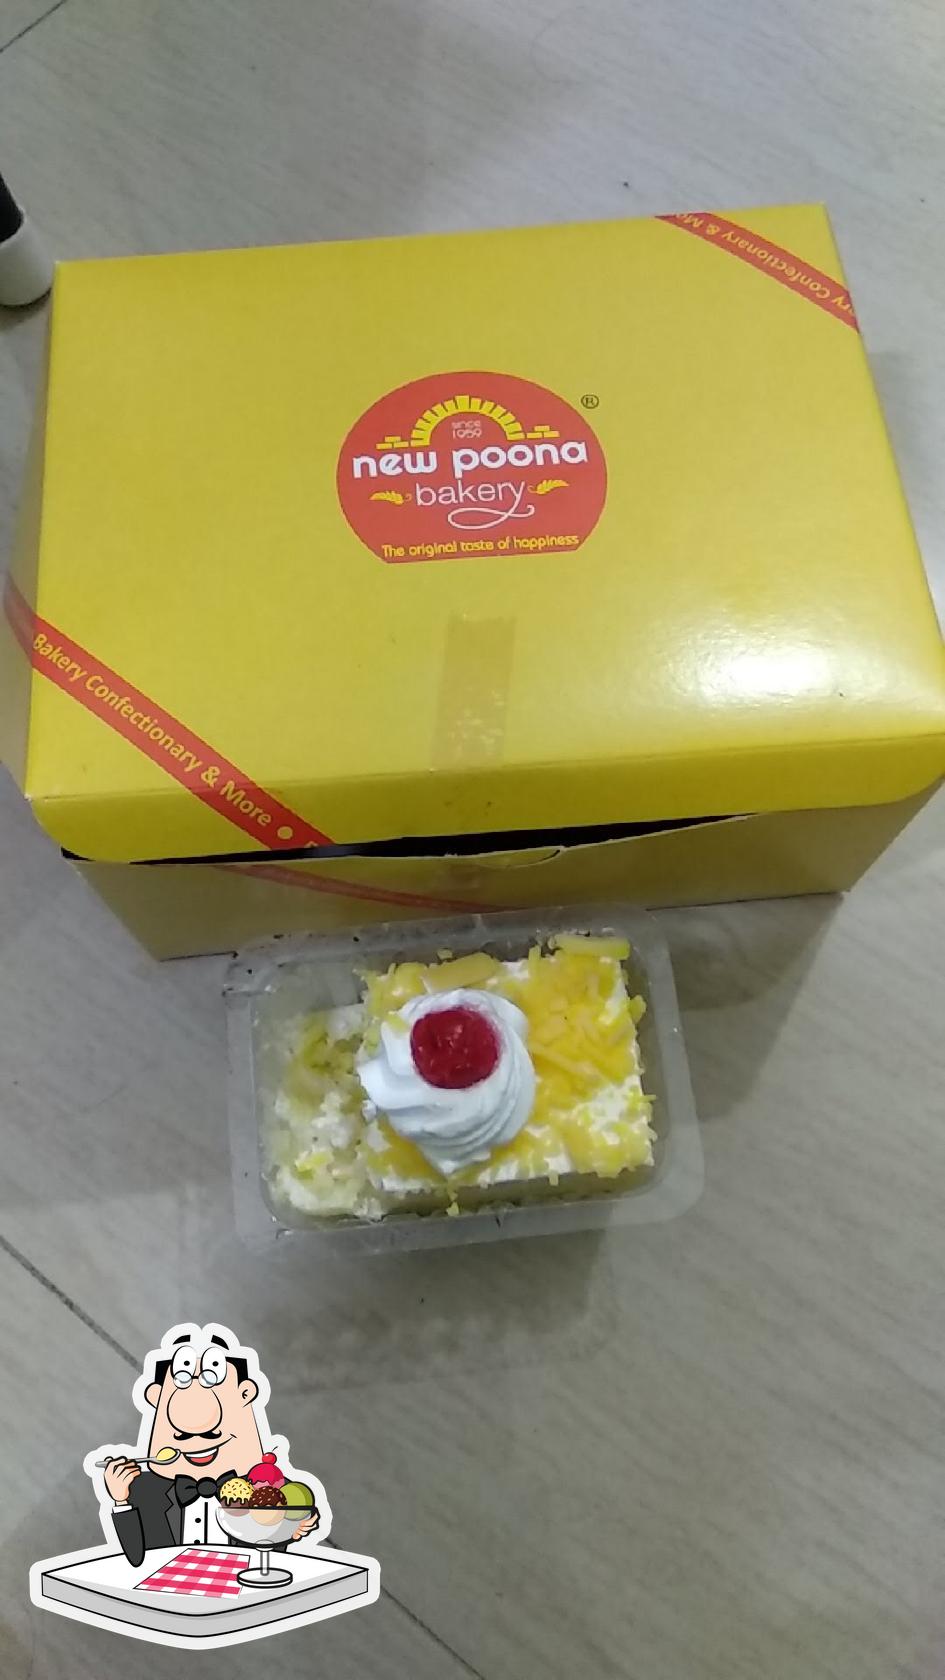 New Poona Bakery - Dessert + cake? A perfect Diwali combo! Isn't it? This  Diwali bring home the sweetness with Special Dessert Cakes! . . .  #punefoodie #bakery #newpoonabakery #baking #new #bakery #